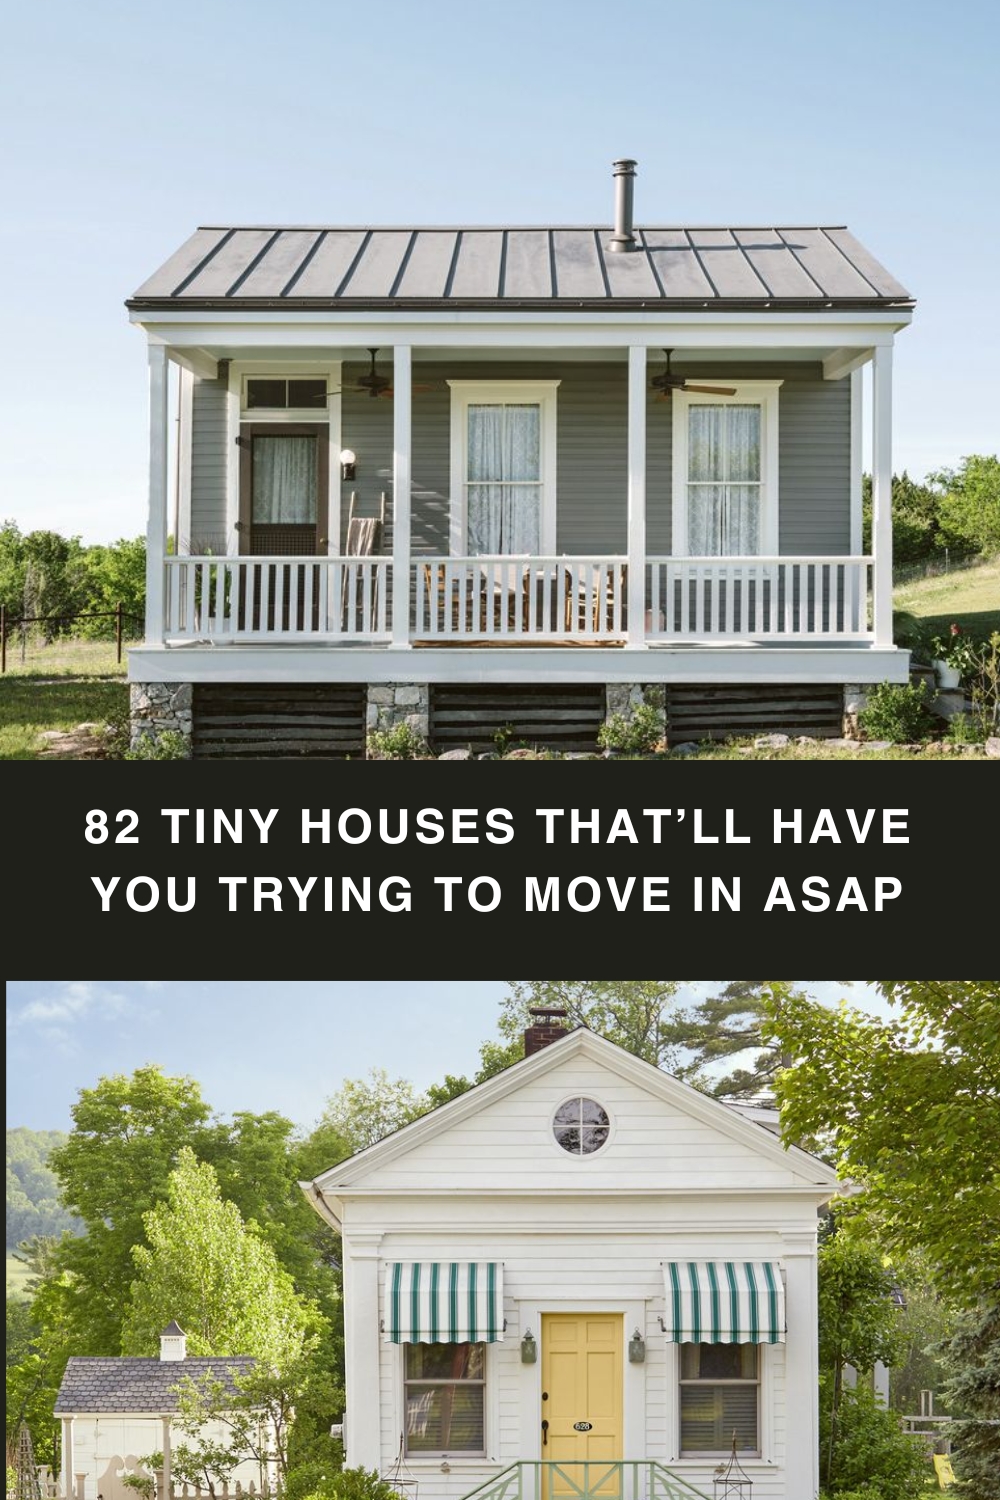 82 Tiny Houses That’ll Have You Trying to Move in ASAP